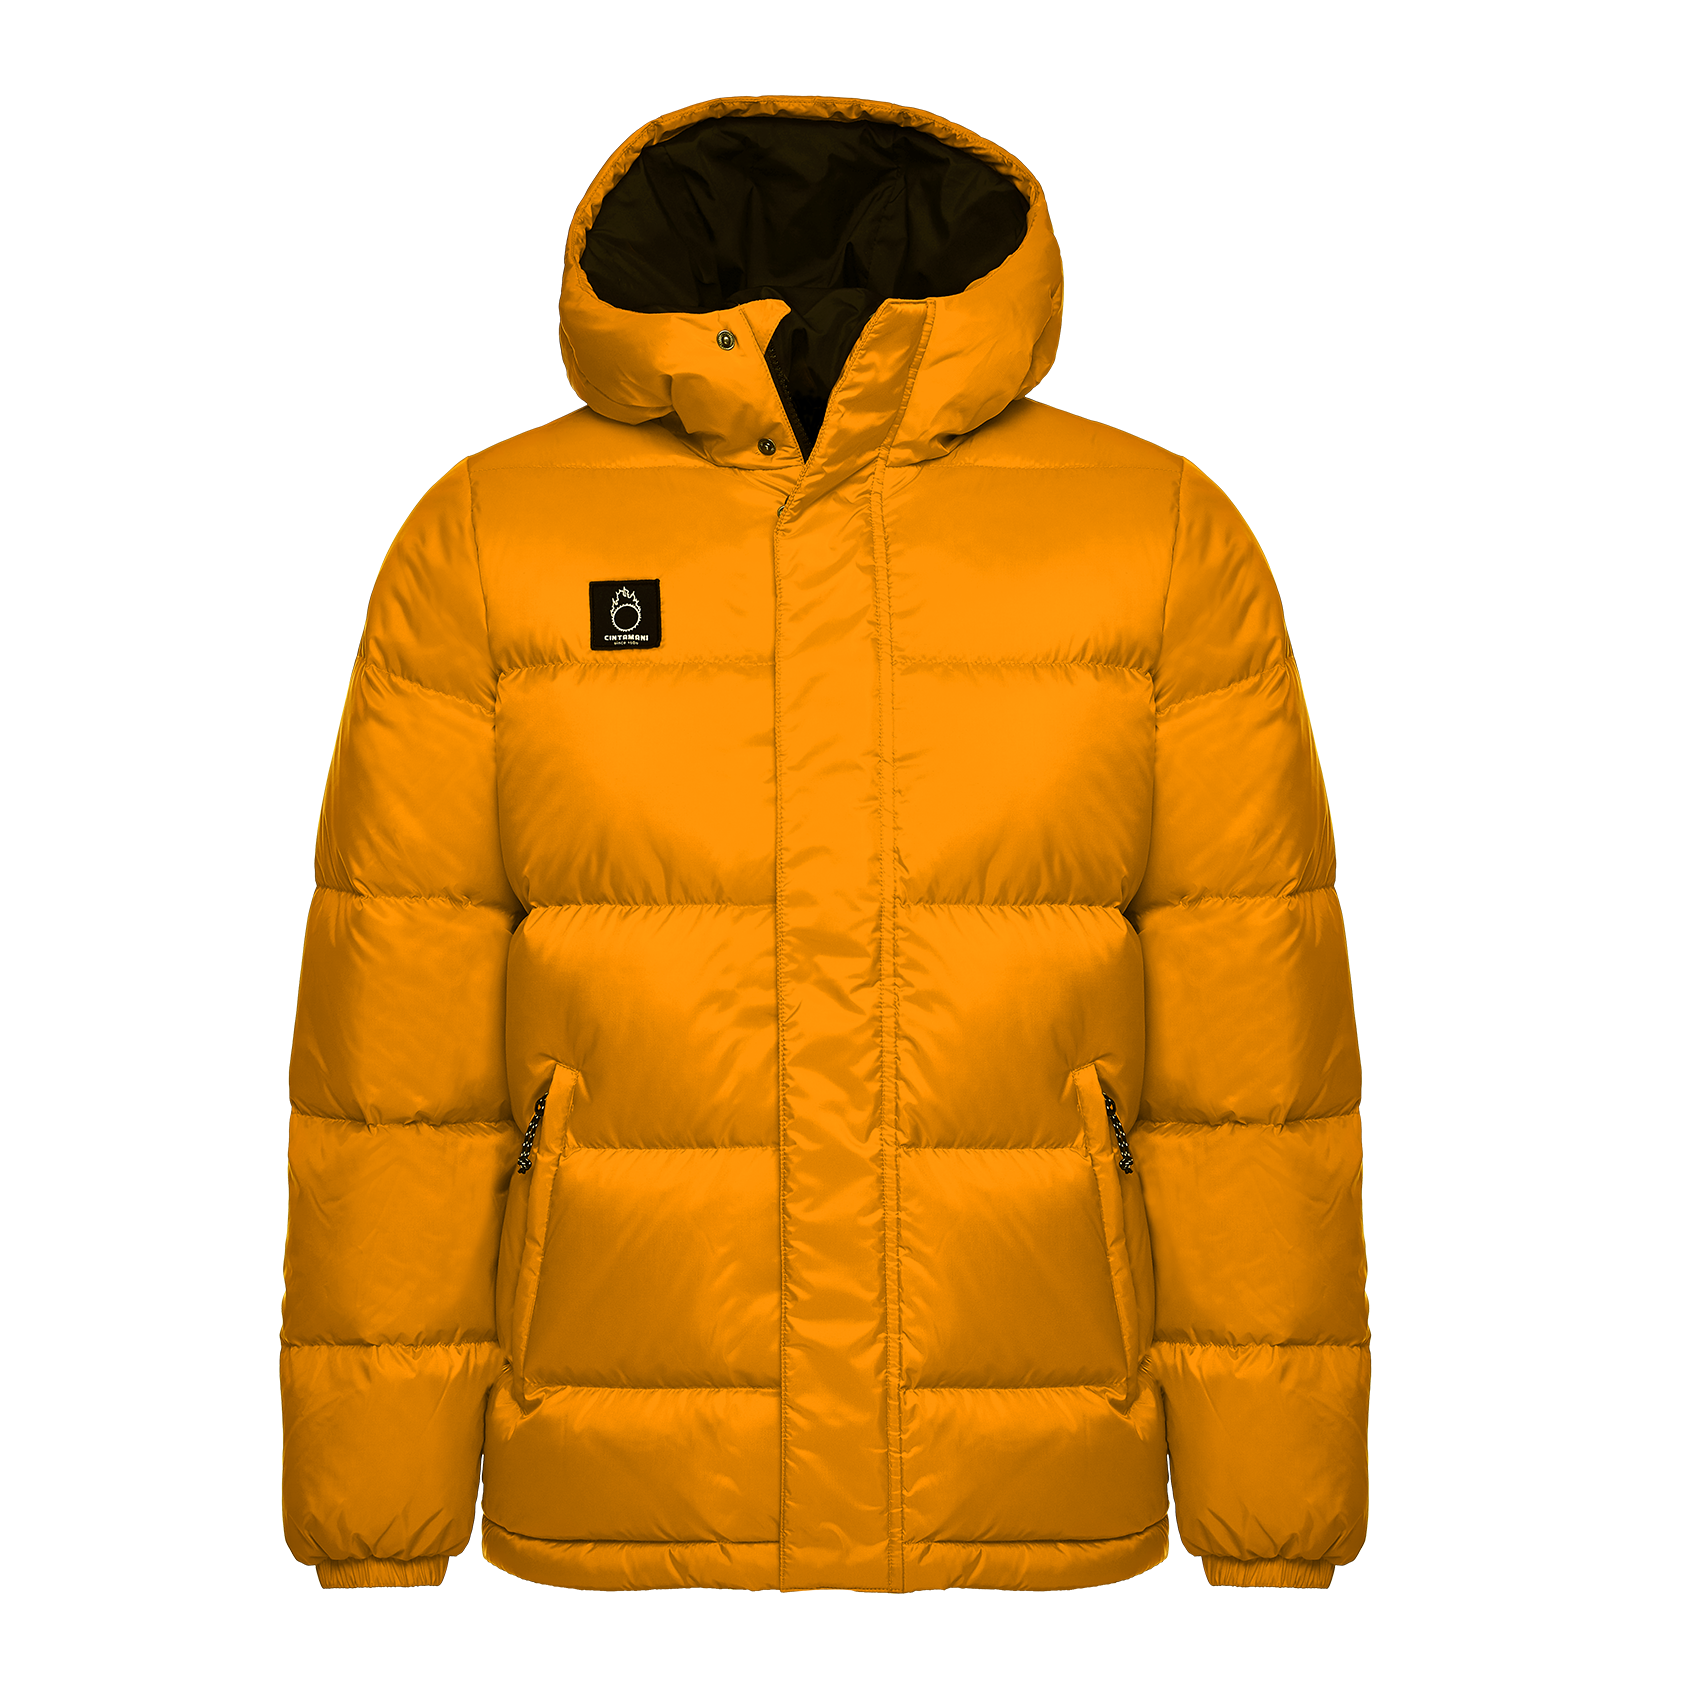 Wear & Fashion :: Women's Clothing :: & Coats :: Cintamani Iceland Kylja unisex puffy down jacket filled with quality duck down. - Products